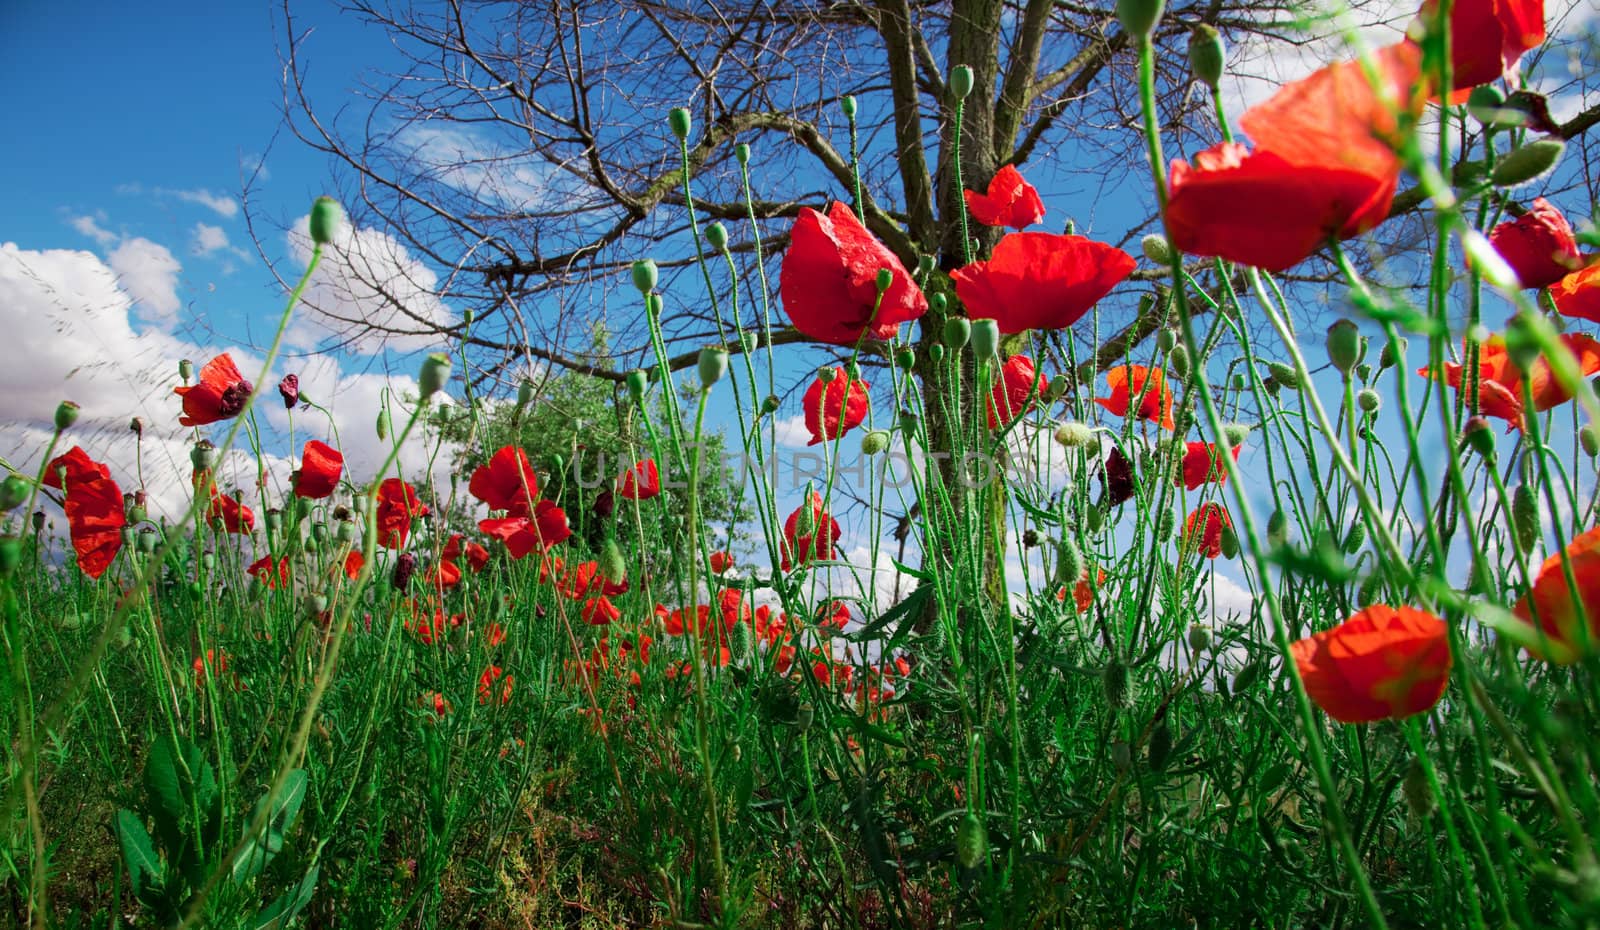 Idilic image of field of poppies